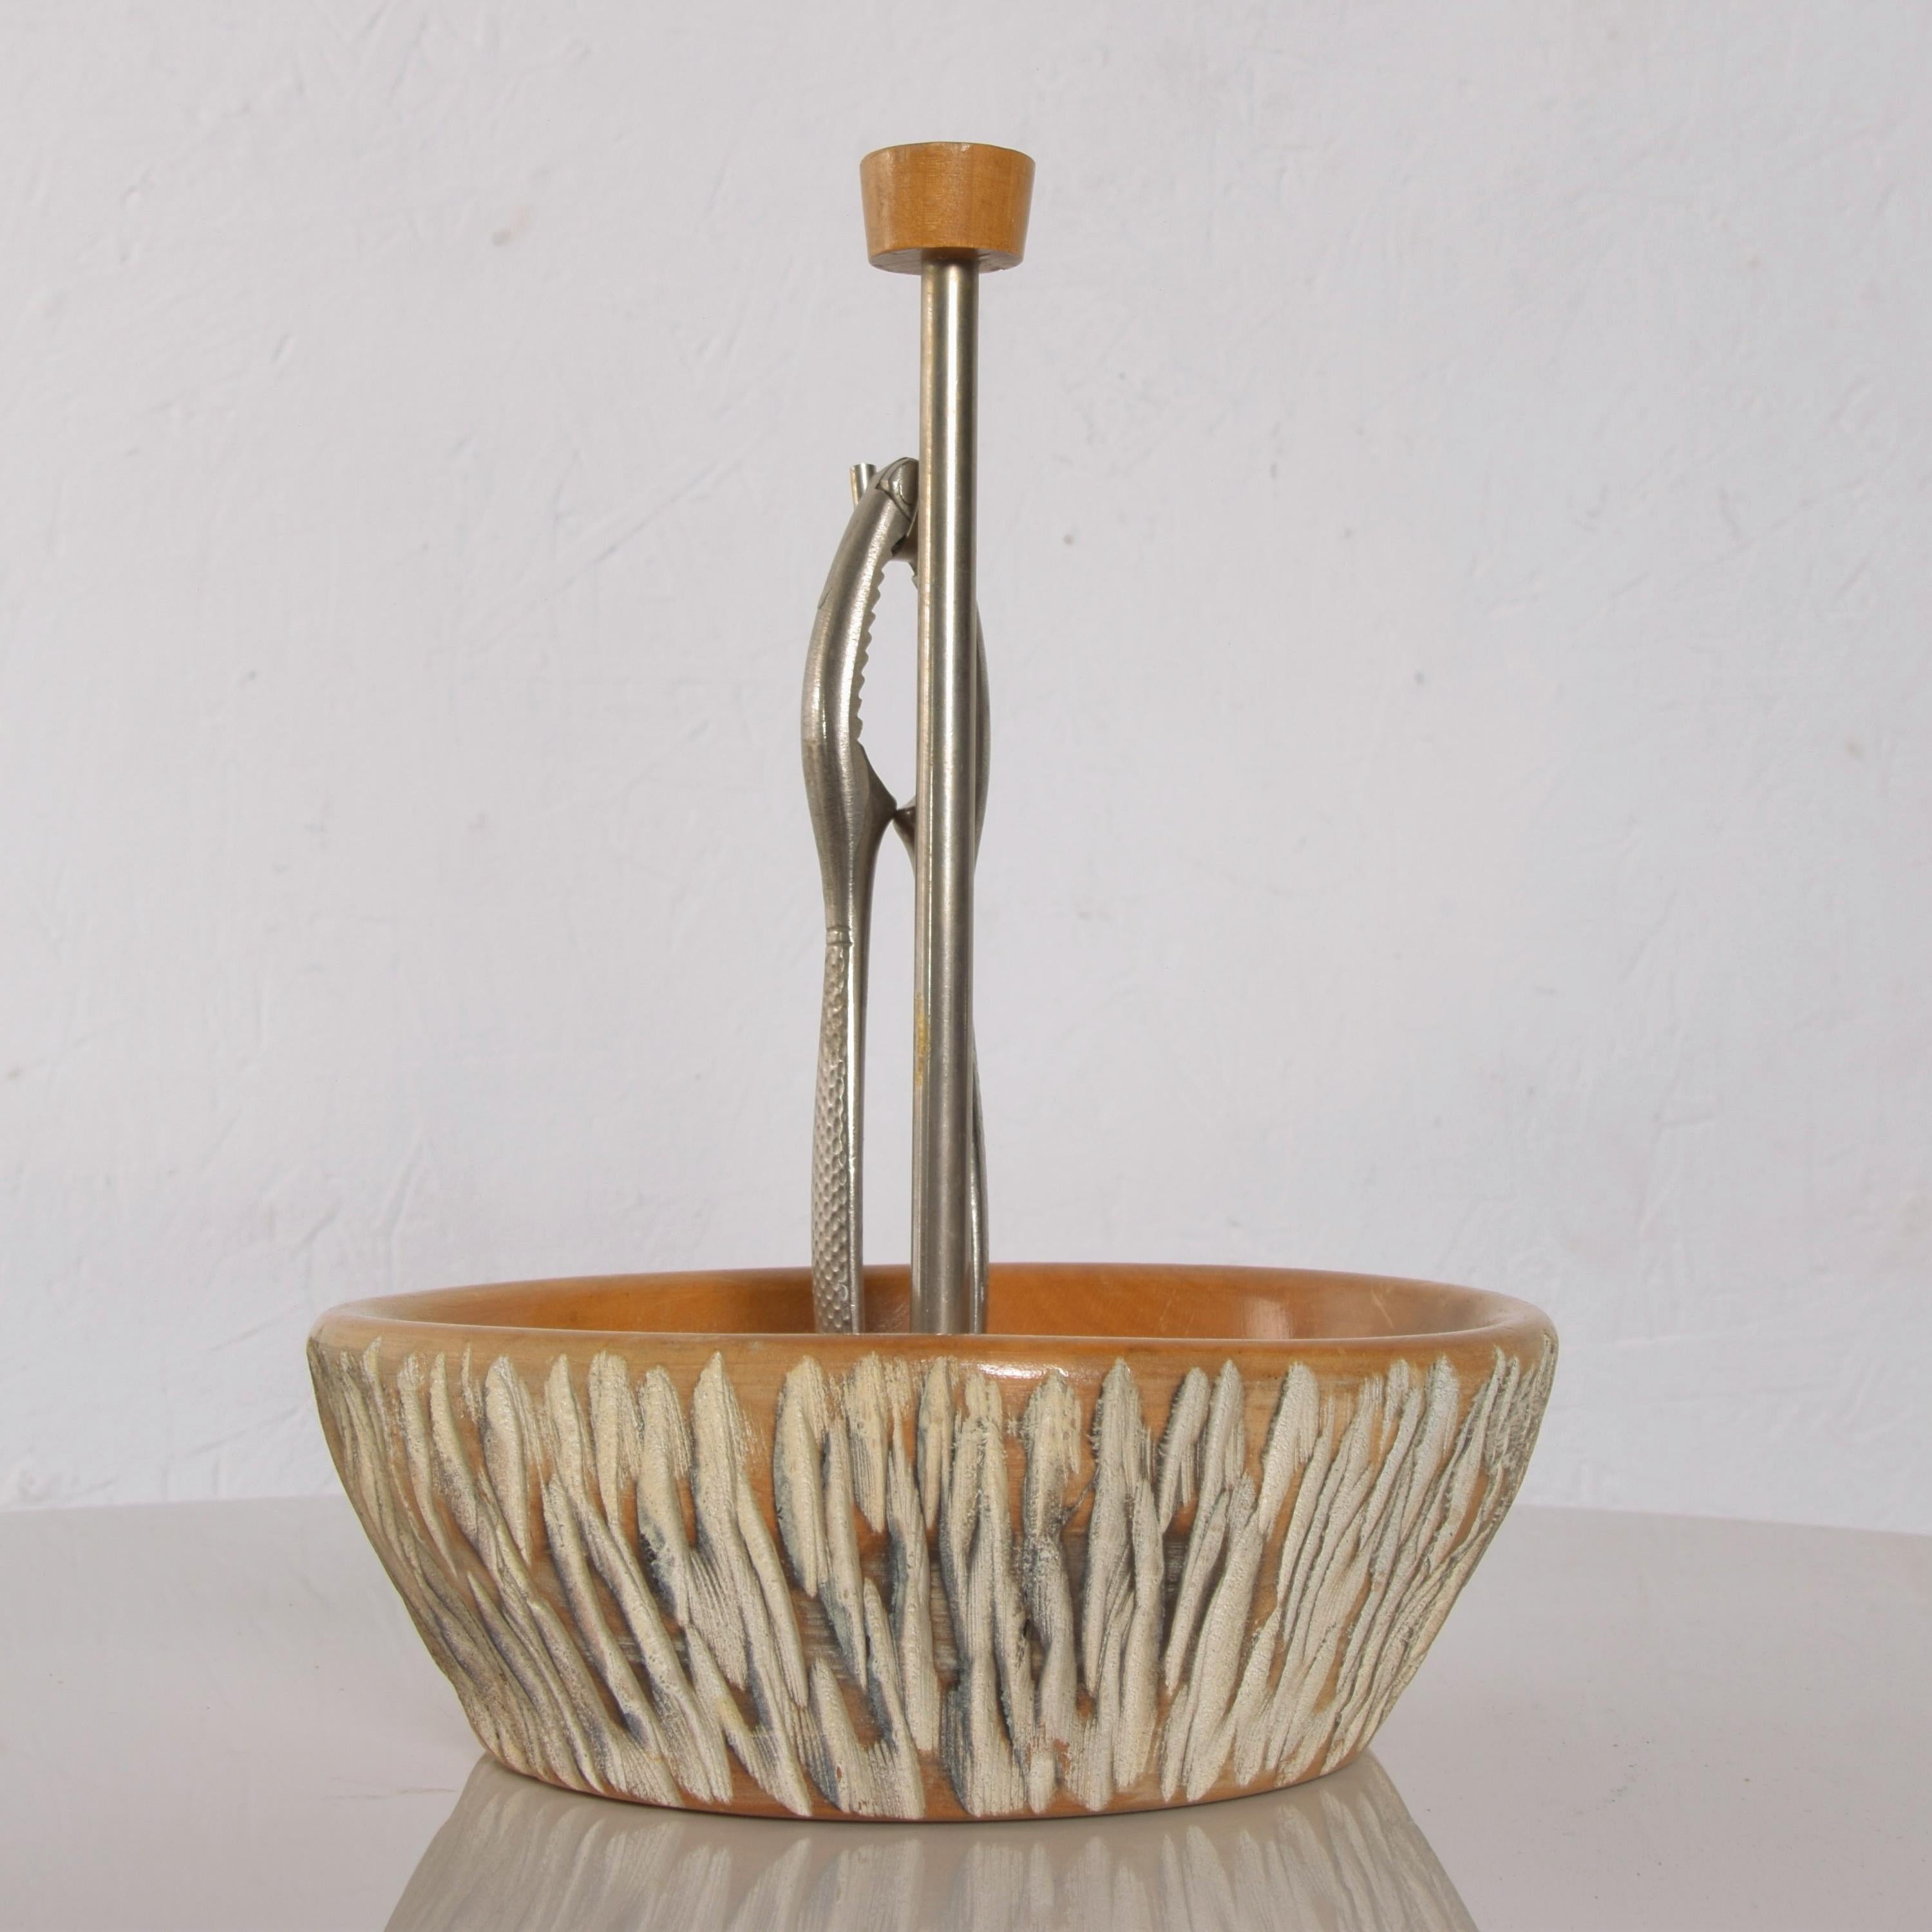 Italian Aldo Tura Macabo Sculptural Wood Nutcracker Dish with Stainless Tool 1960s Italy